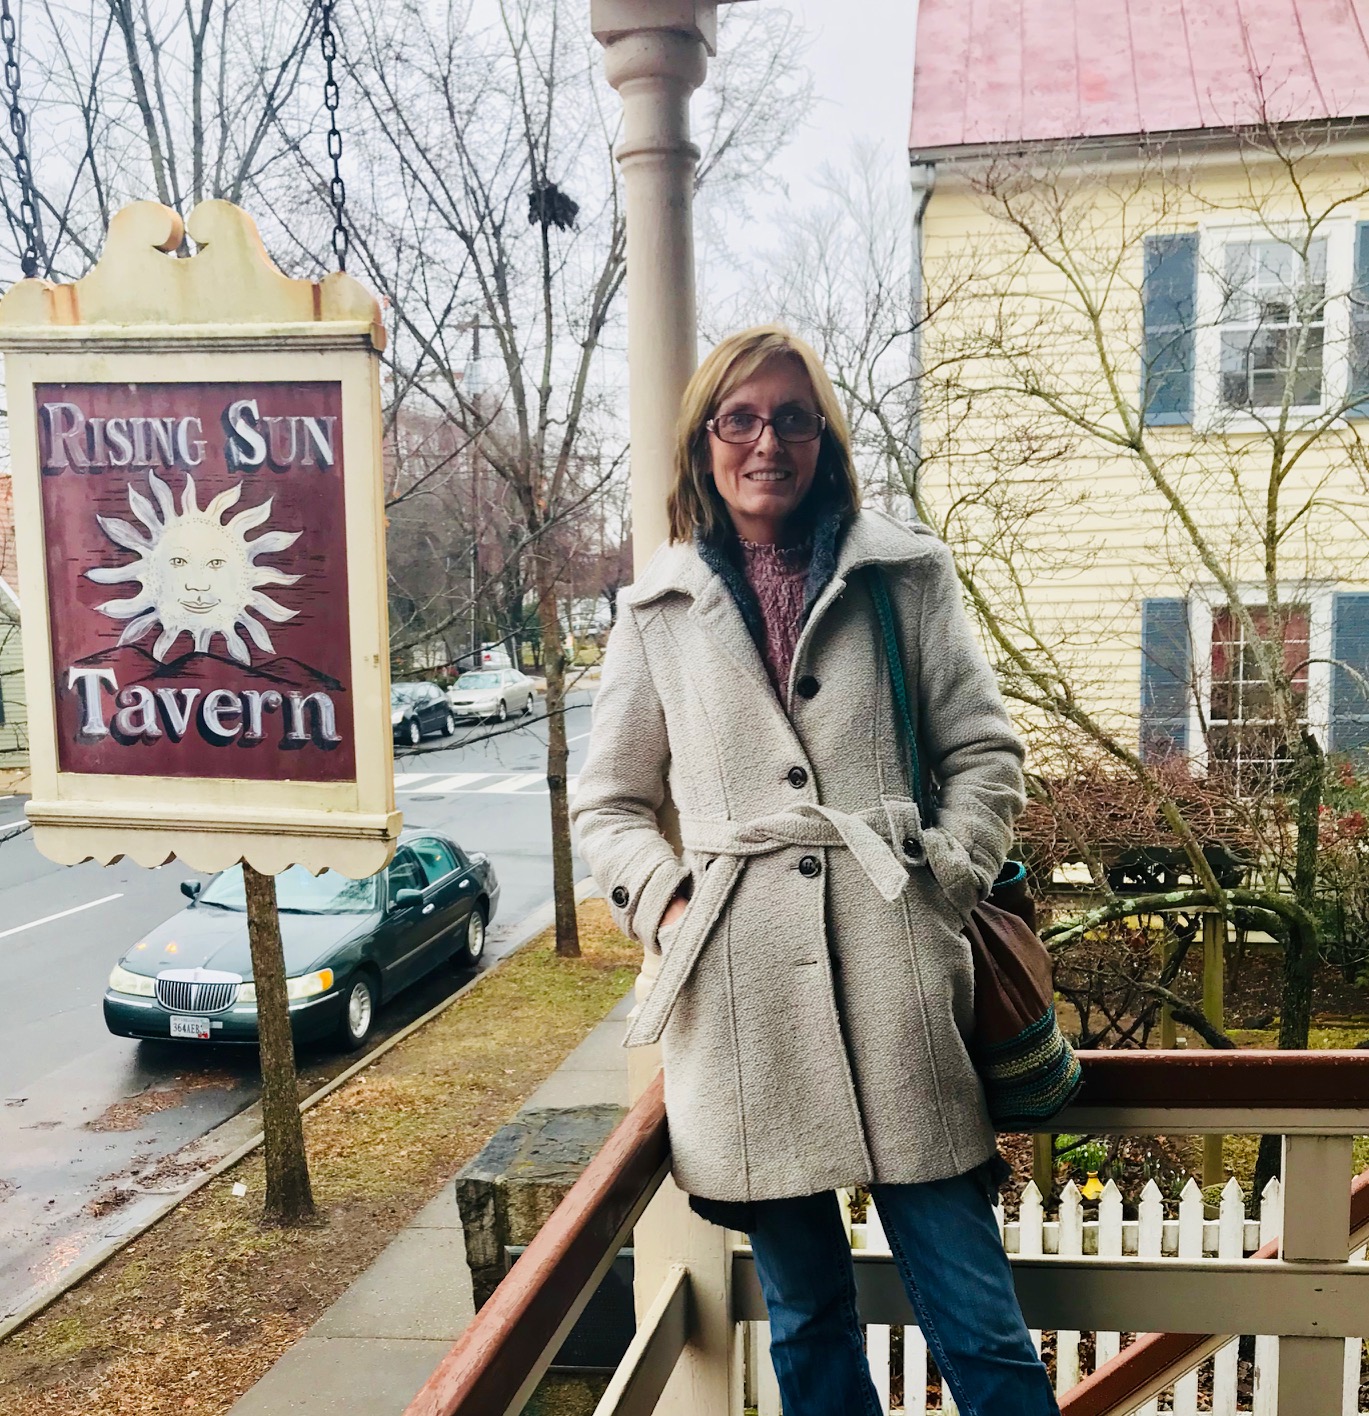 Rising Sun Tavern and The Holocaust Museum